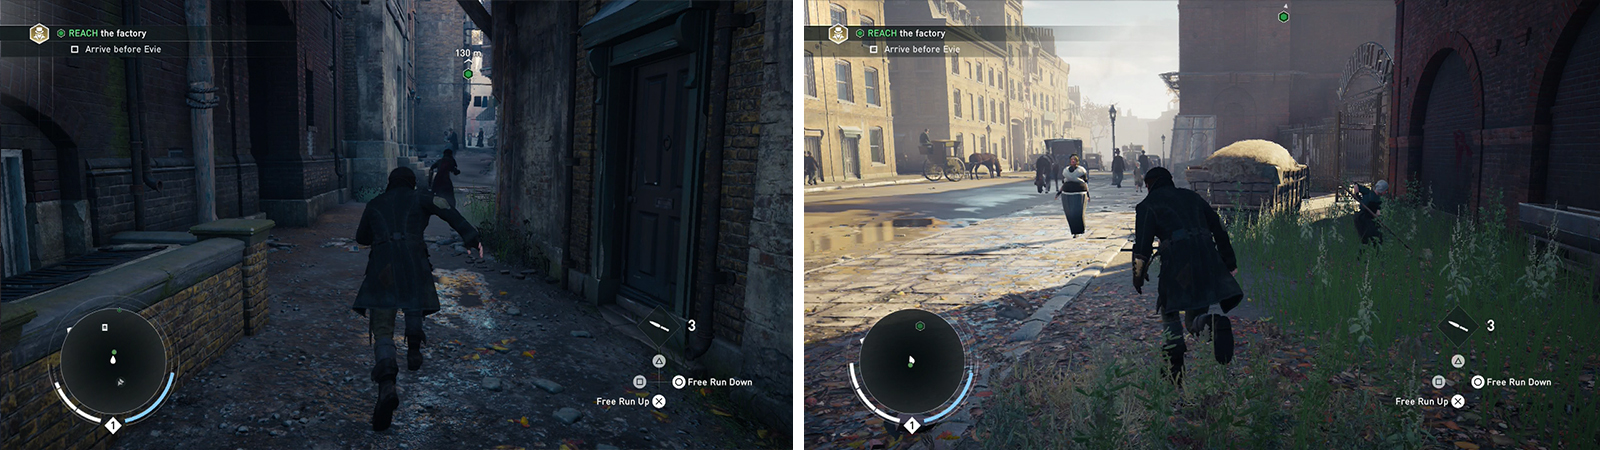 Race Evie to the next waypoint (left). Use the slanted flatbed pictured to take a shortcut up the target building (right).